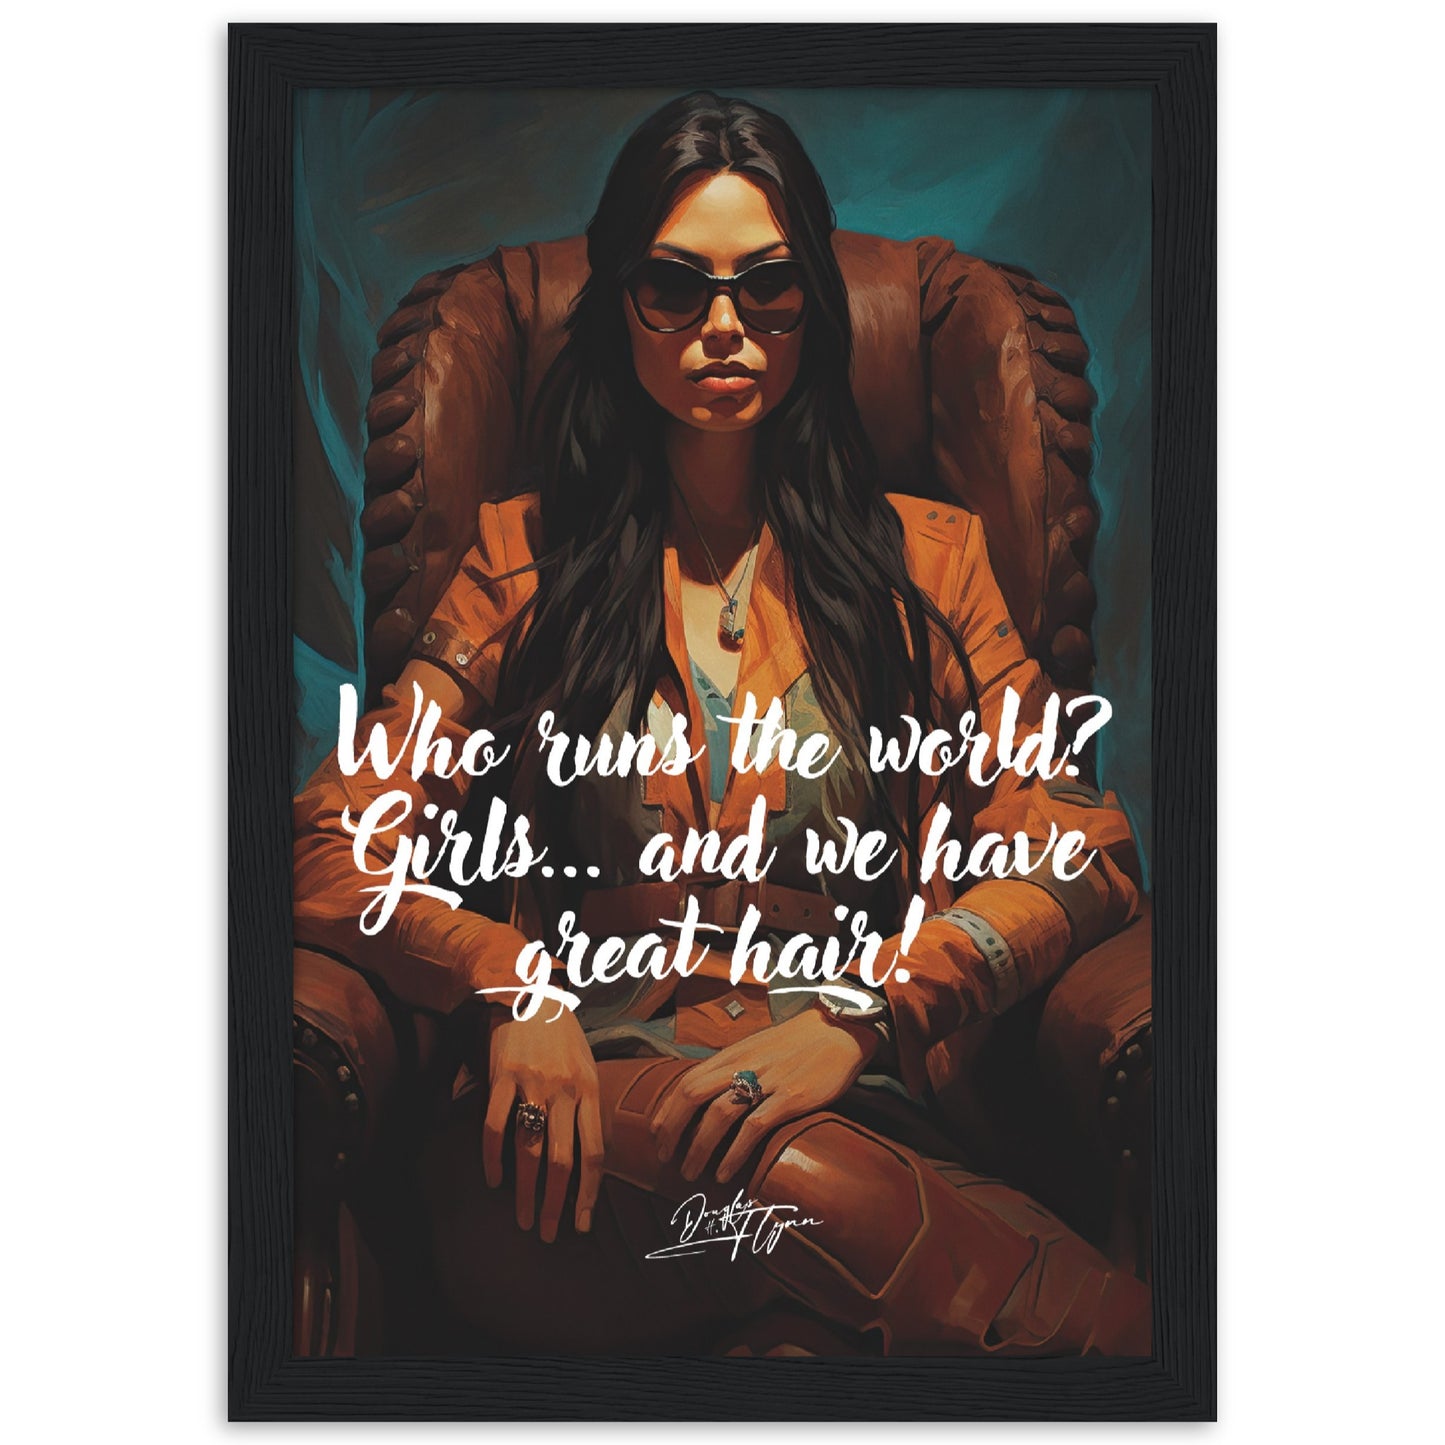 »Who runs the world? Girls and we have great hair!«